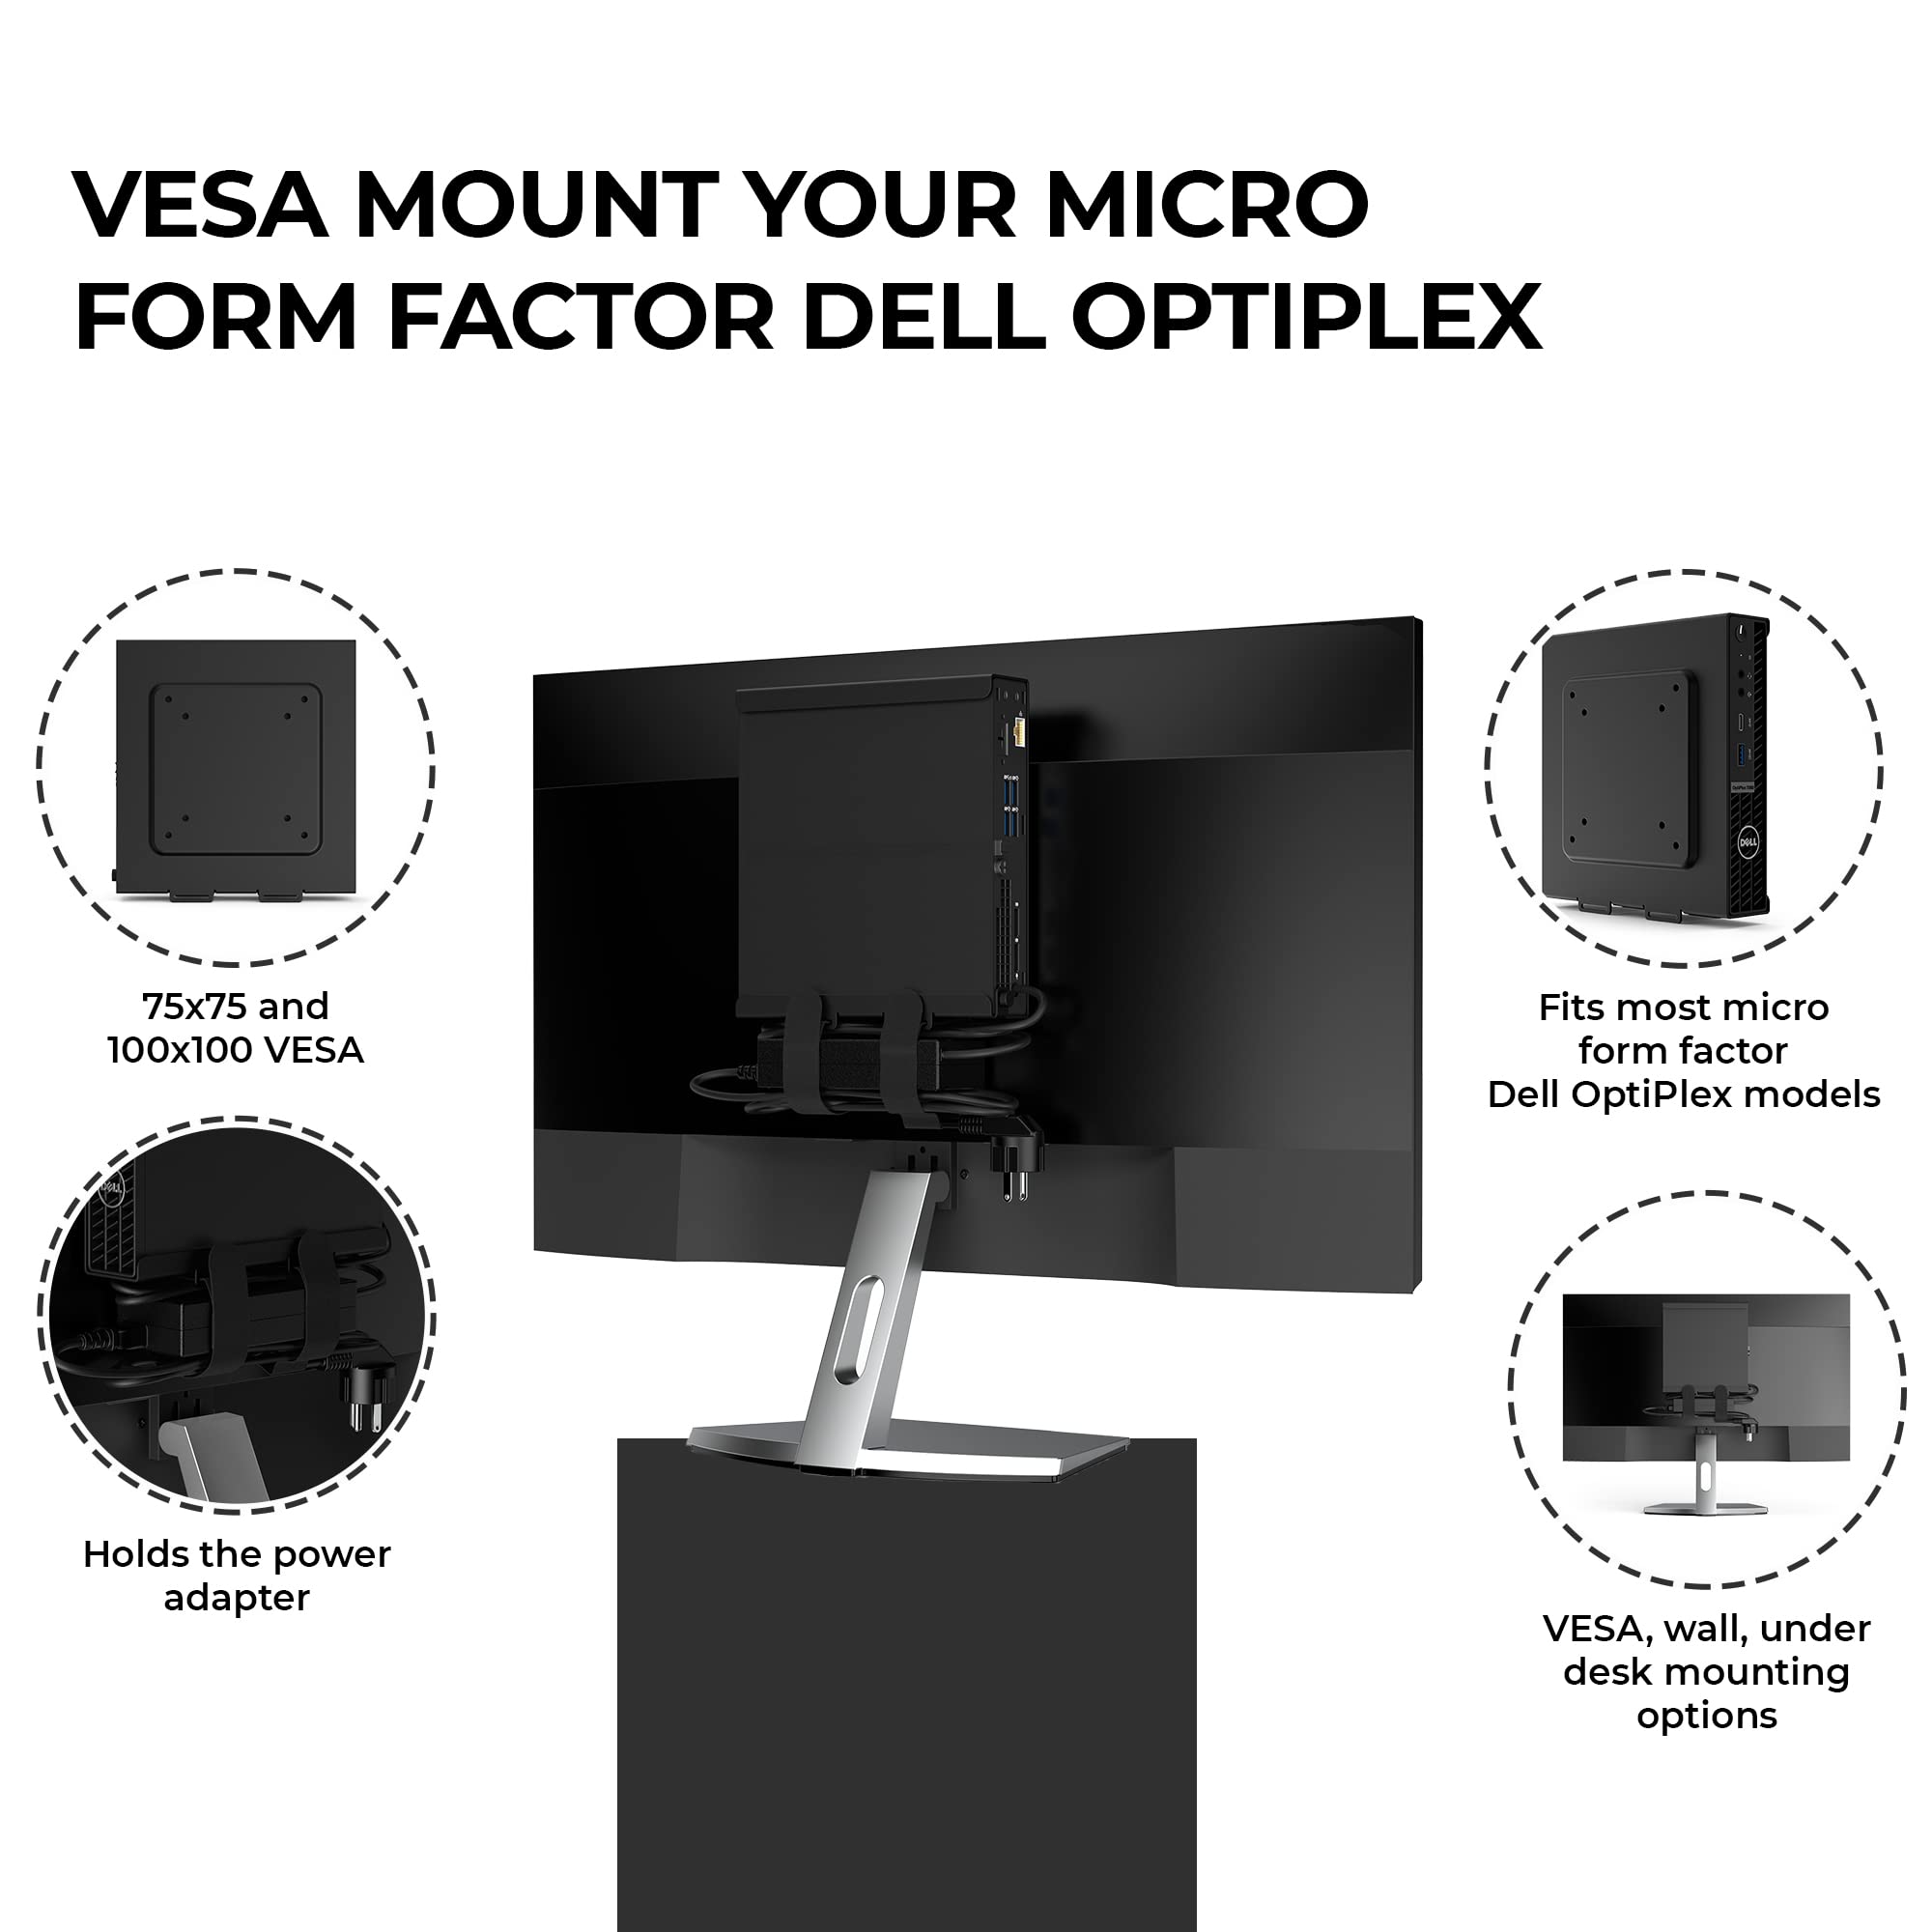 Mua HumanCentric Mount Compatible with Dell OptiPlex Micro Form Factor  Case, VESA, Under Desk and Wall Mount Fits MFF 3040, 3046, 3050, 3060,  3070, 3080, 5050, 5060, 5070, 7040, 7050, 7060, 7070, and More trên Amazon  Anh chính hãng 2023 | Giaonhan247